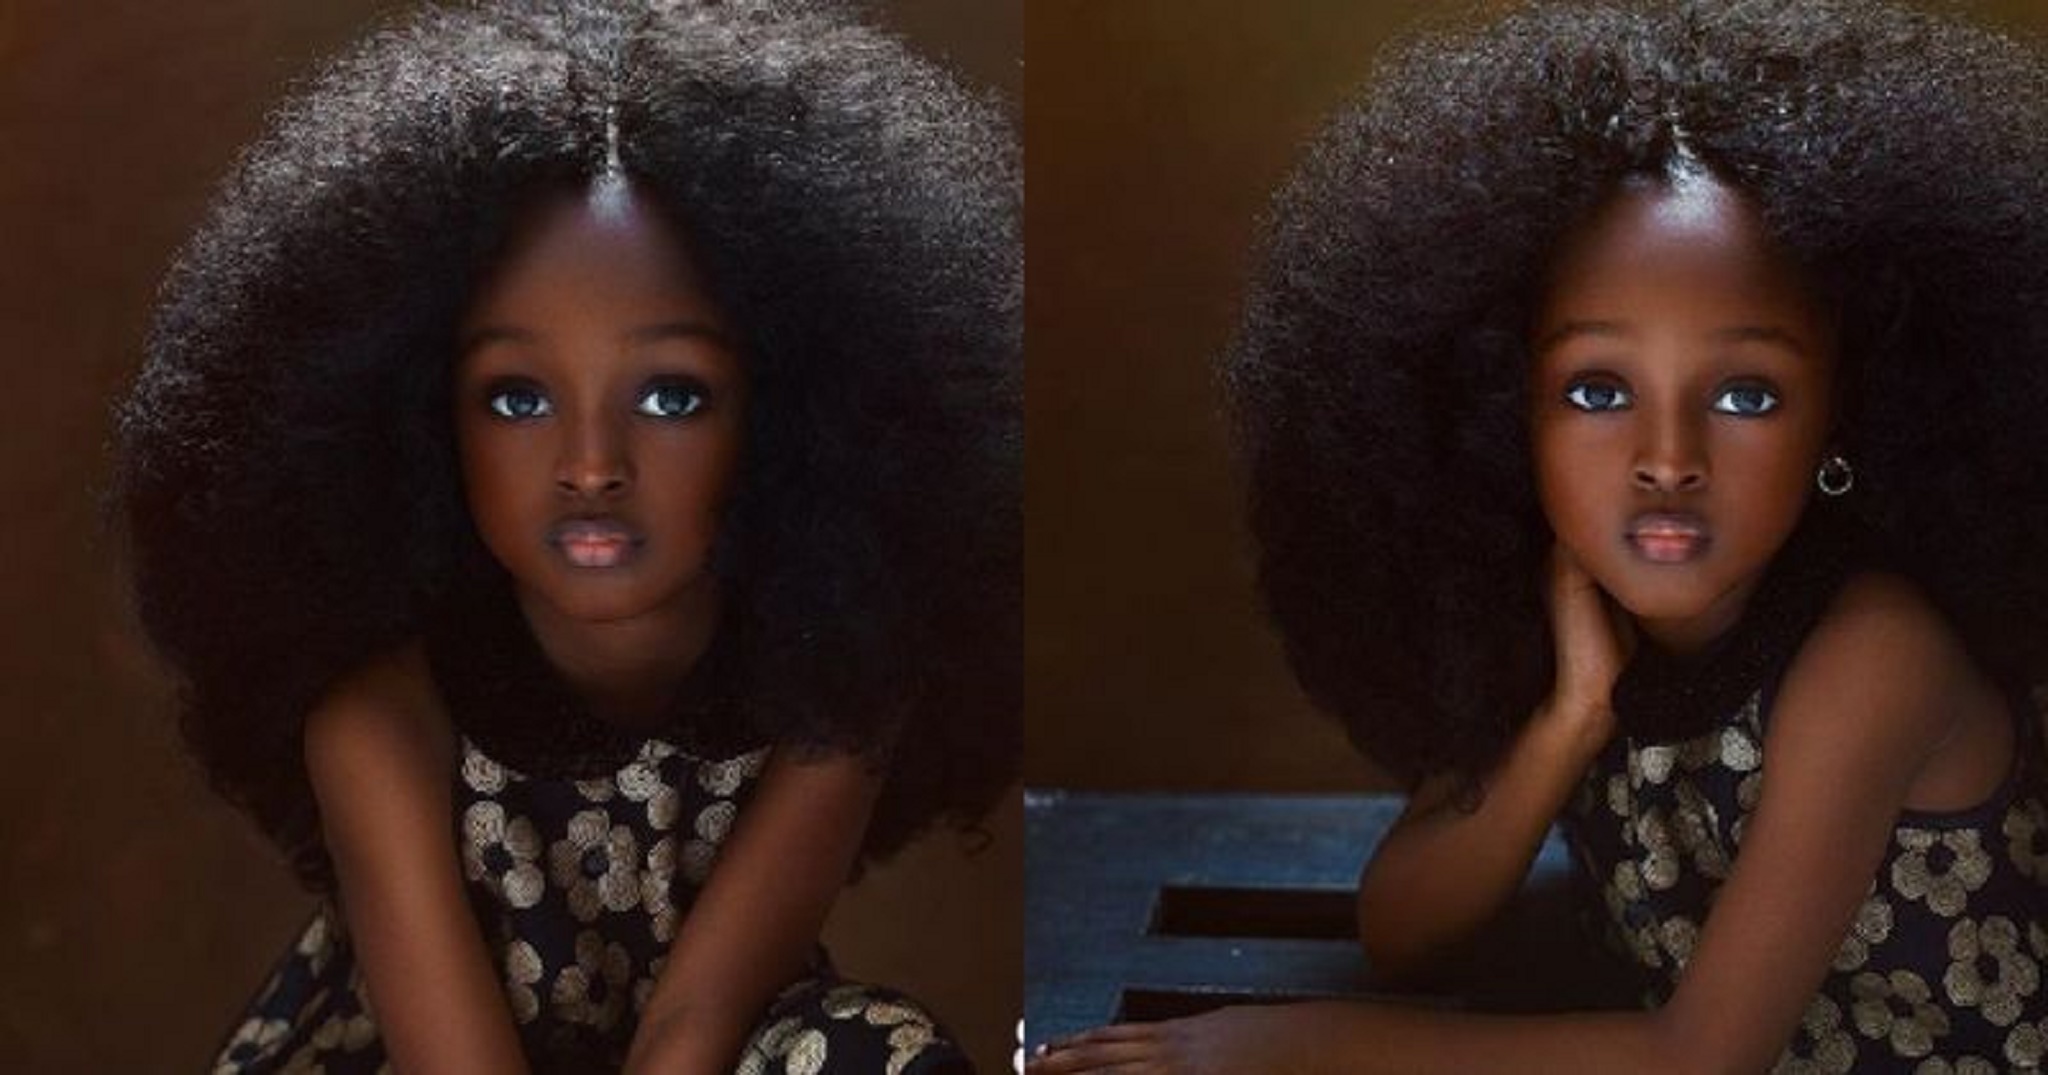 Being called “World’s Most Beautiful girl”, this 5 YO’s pictures are going viral